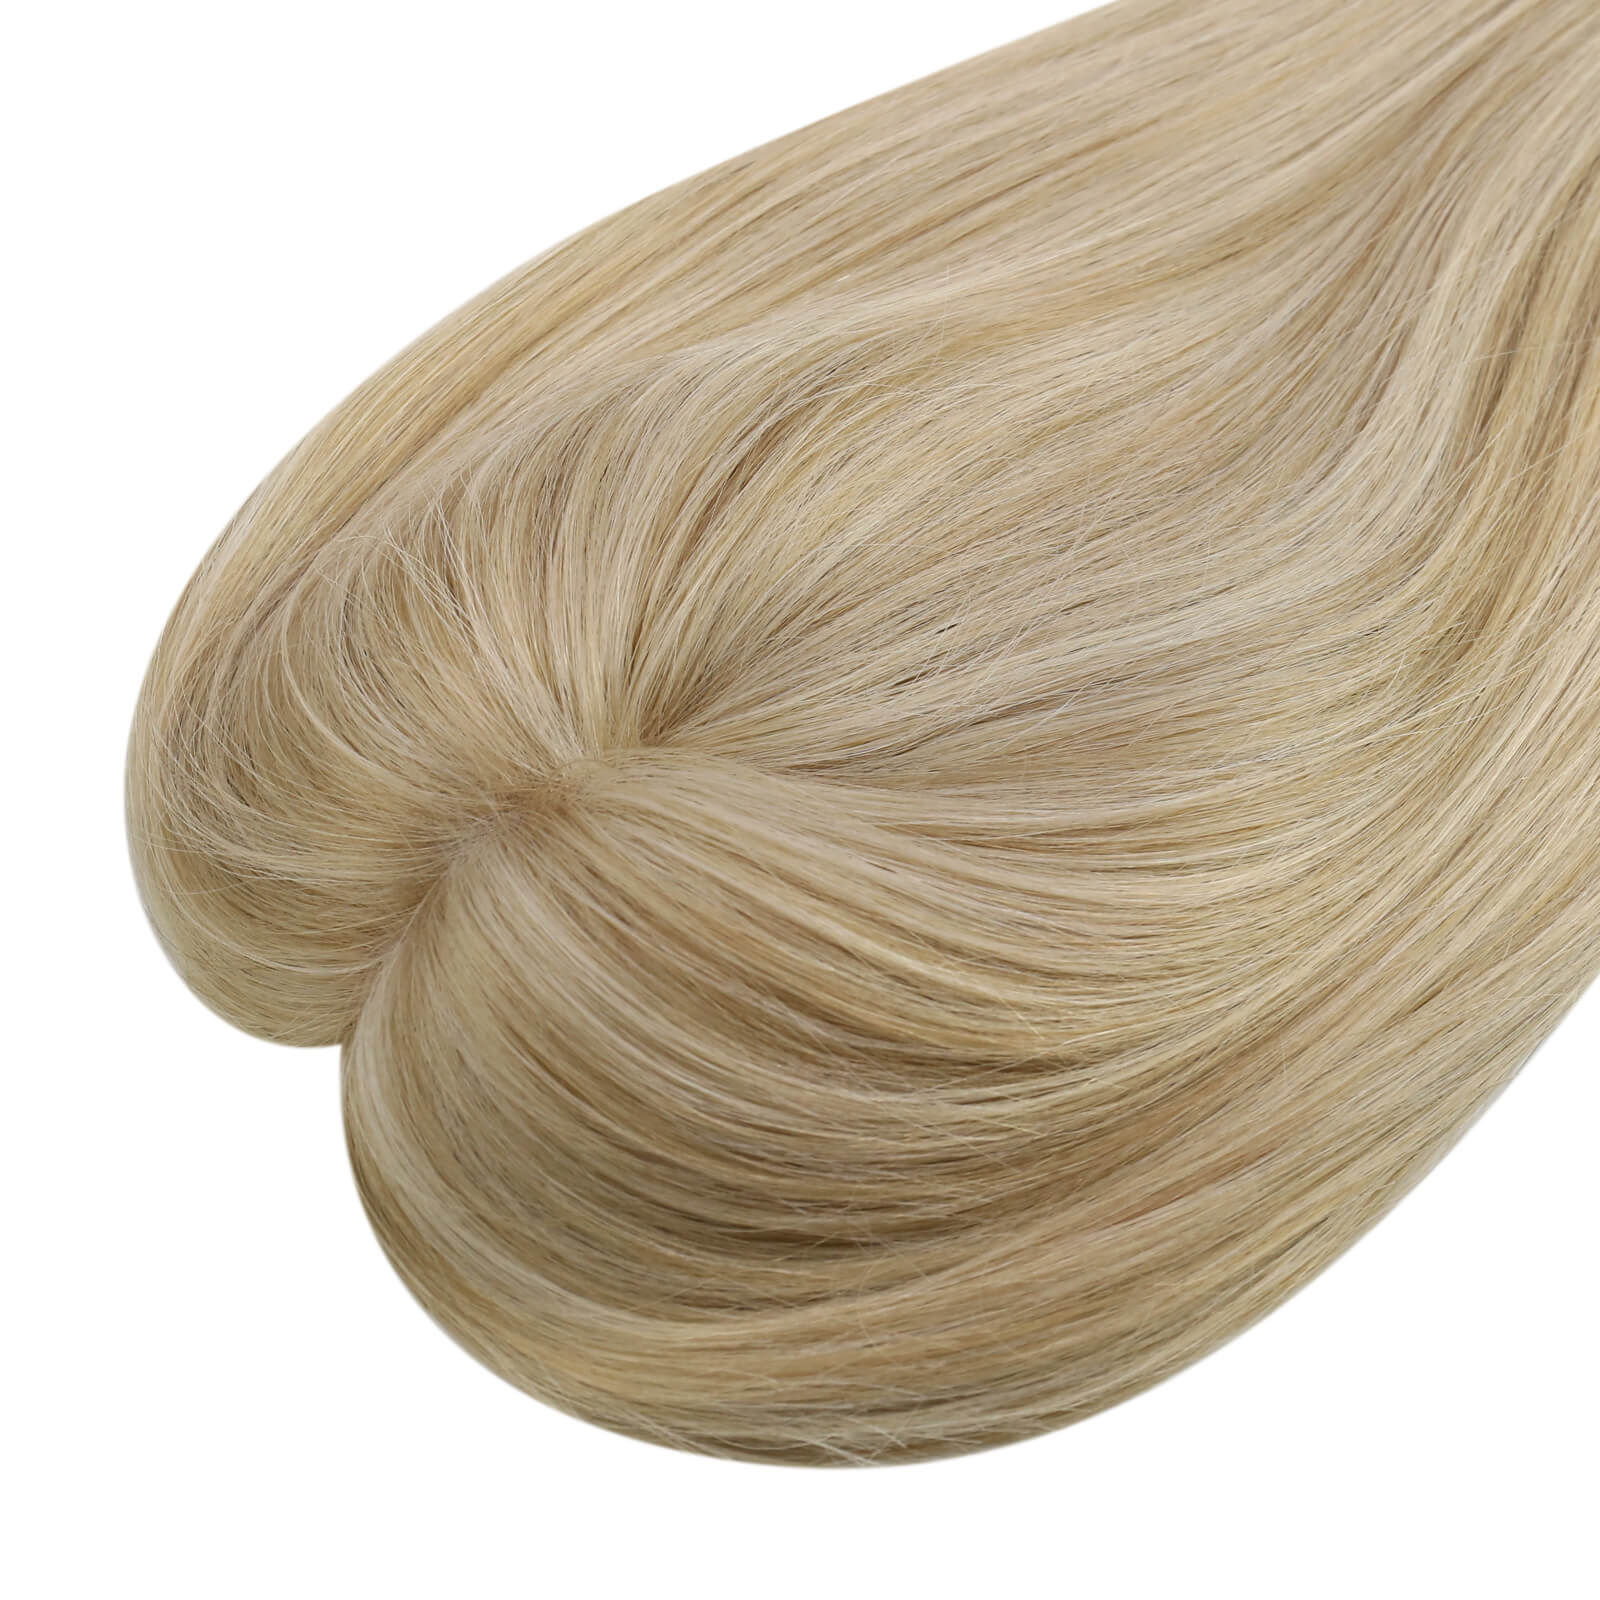 Mono Topper,human hair topper,high-quality virgin hair extensions,hair topper women,hair topper,wig,hair topper silk base,hair topper human hair,light brown hair topper,blonde hair topper,natural blonde hair topper,balayage hair topper,balayage hair extensions,blonde highlight,brown highlight,distribute seams at will,invisible topper,large base topper,large base 6*7 inch